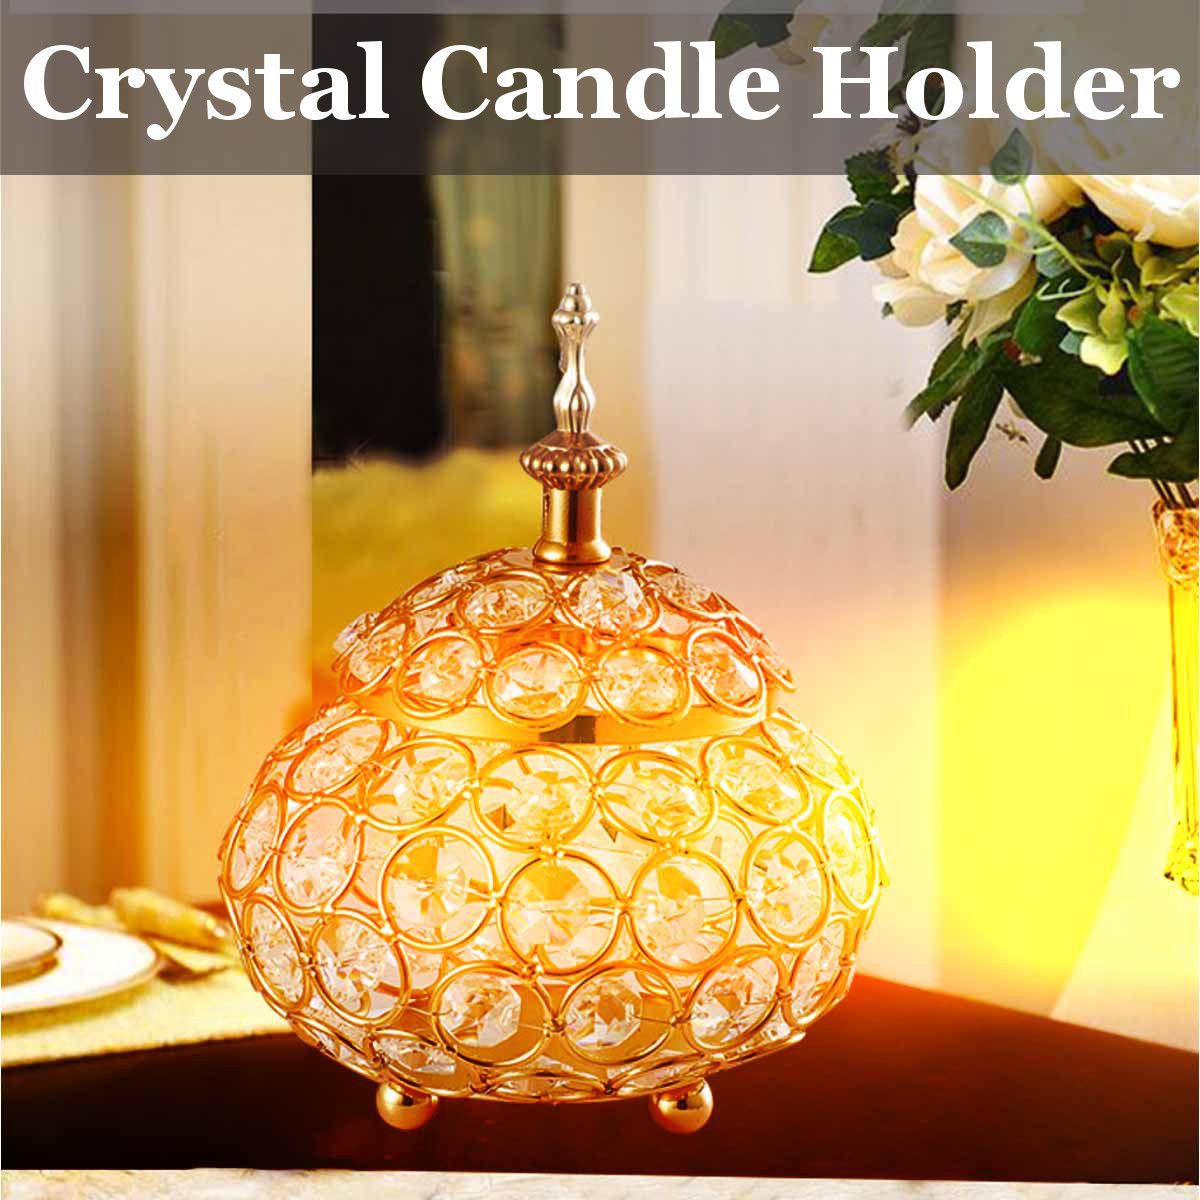 Hollow-Crystal-Tealight-Candle-Lantern-Holders-Gold-Silver-Party-Dinner-Table-Centerpieces-Home-Wedd-1724774